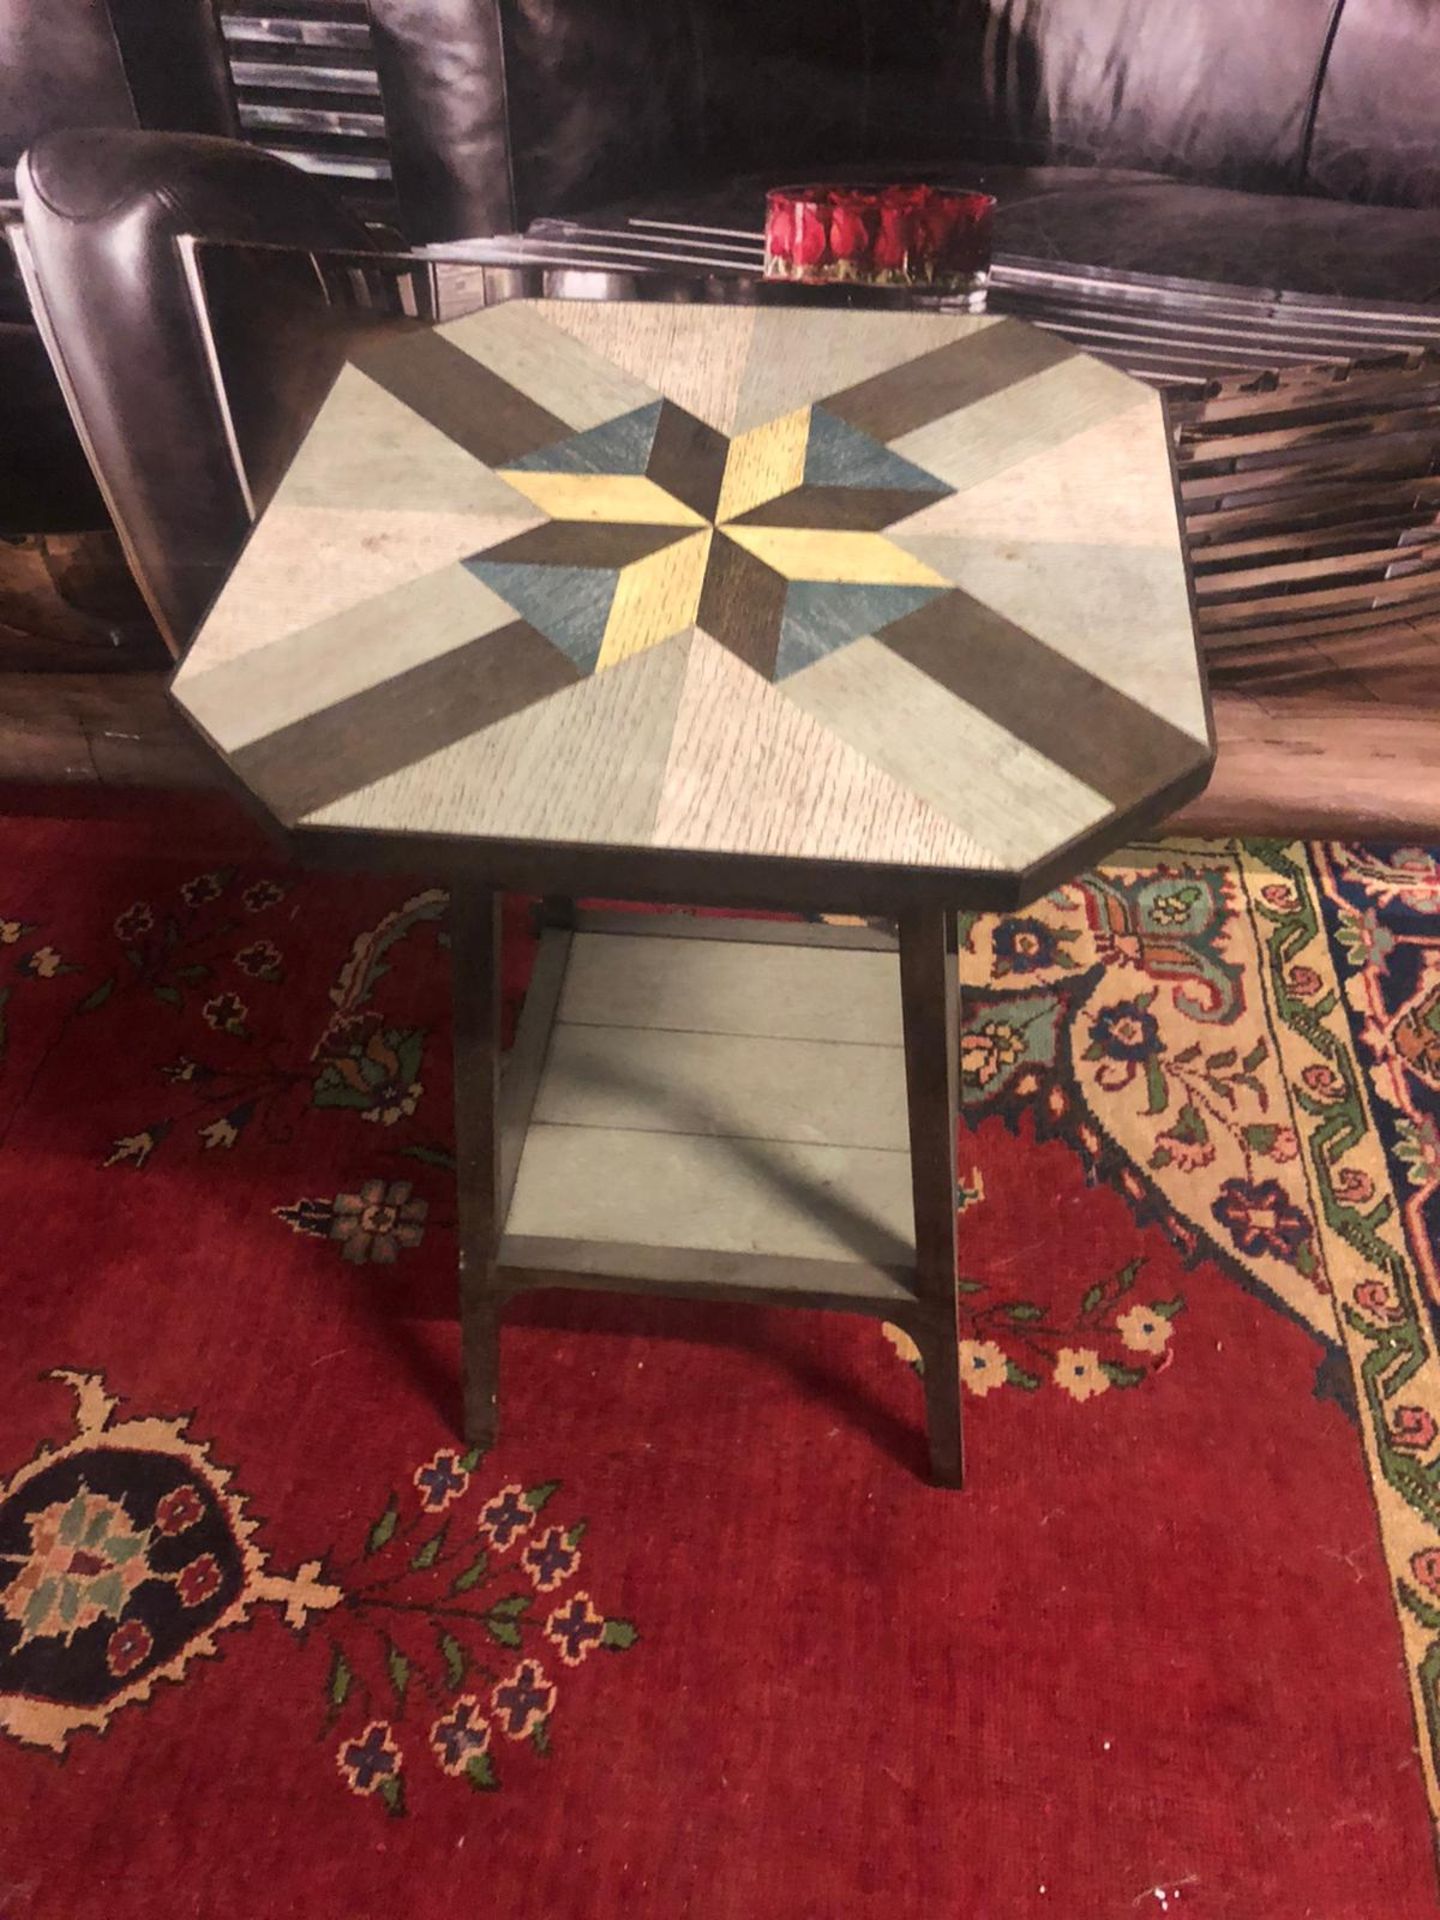 Geometric Top Side Table With Undershelf Works Great As A Lamp TableÃƒâ€š From Sideshow To Show- - Image 4 of 6